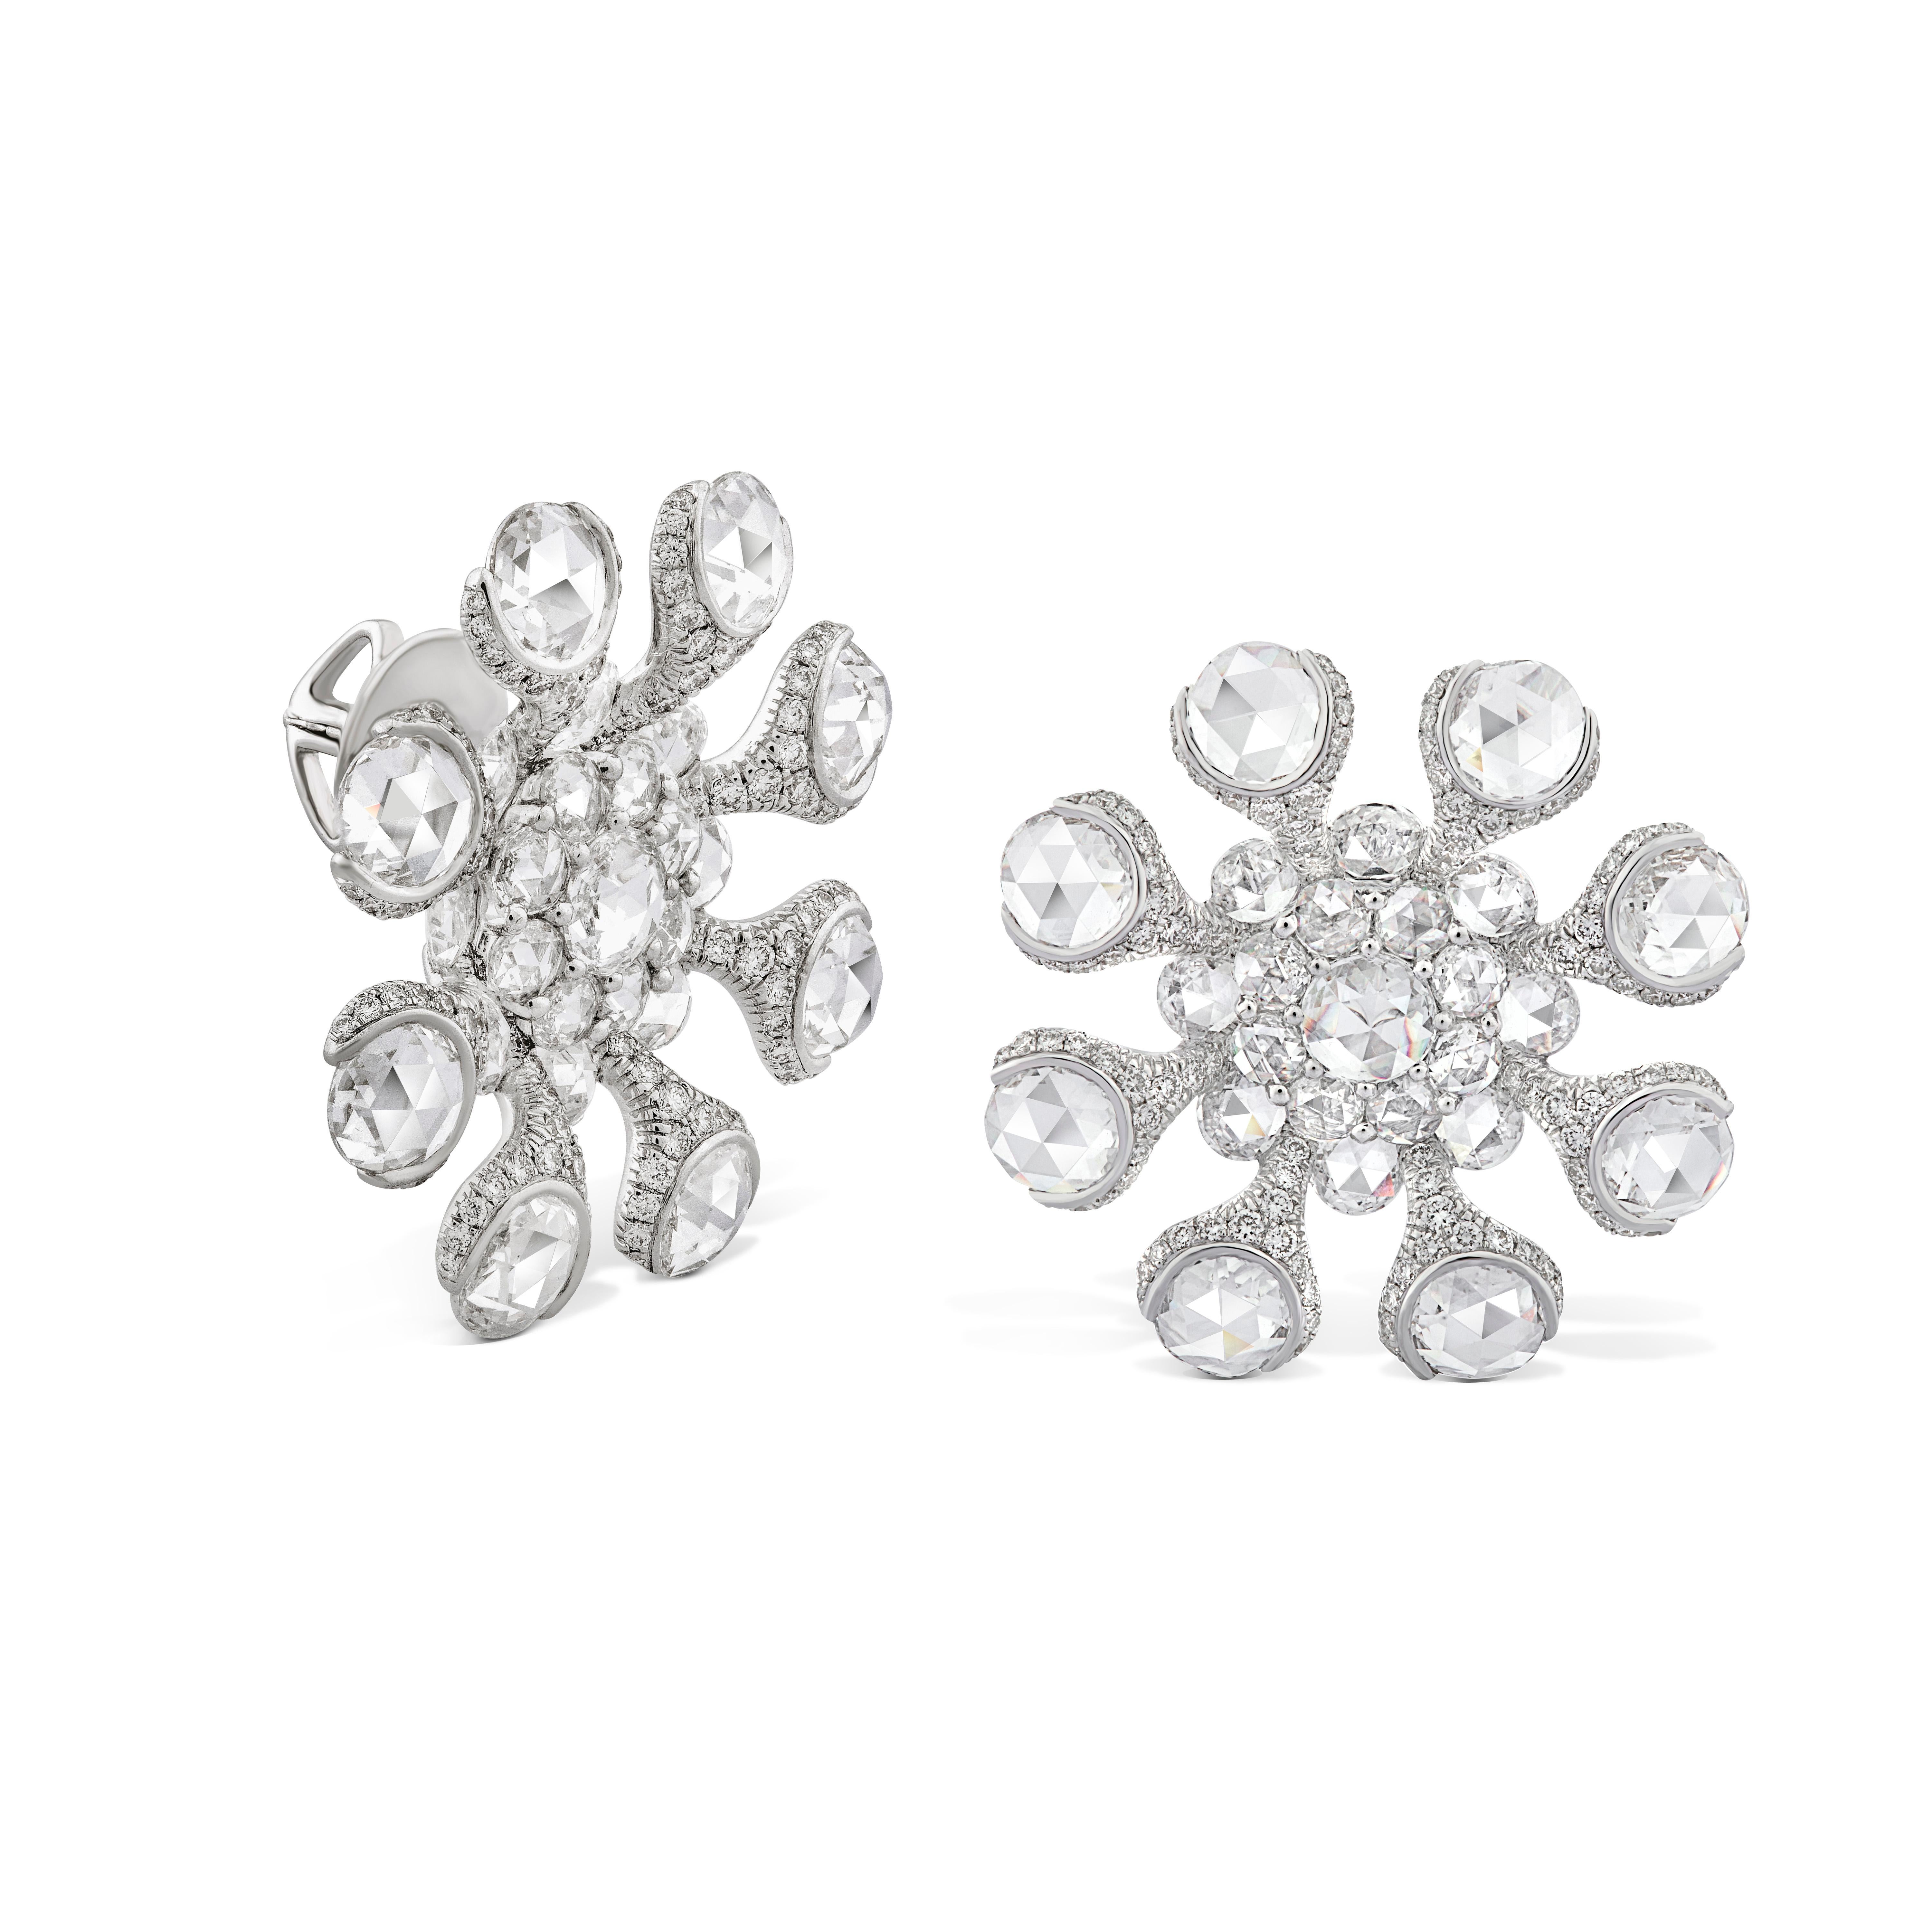 These charming and playful earrings are studded with 50 rose-cut diamonds to recreate the elliptical shape of the baneberry pods. Finished with 256 round brilliant cut diamonds these earrings are eminently eye-catching. 

Total diamond weight